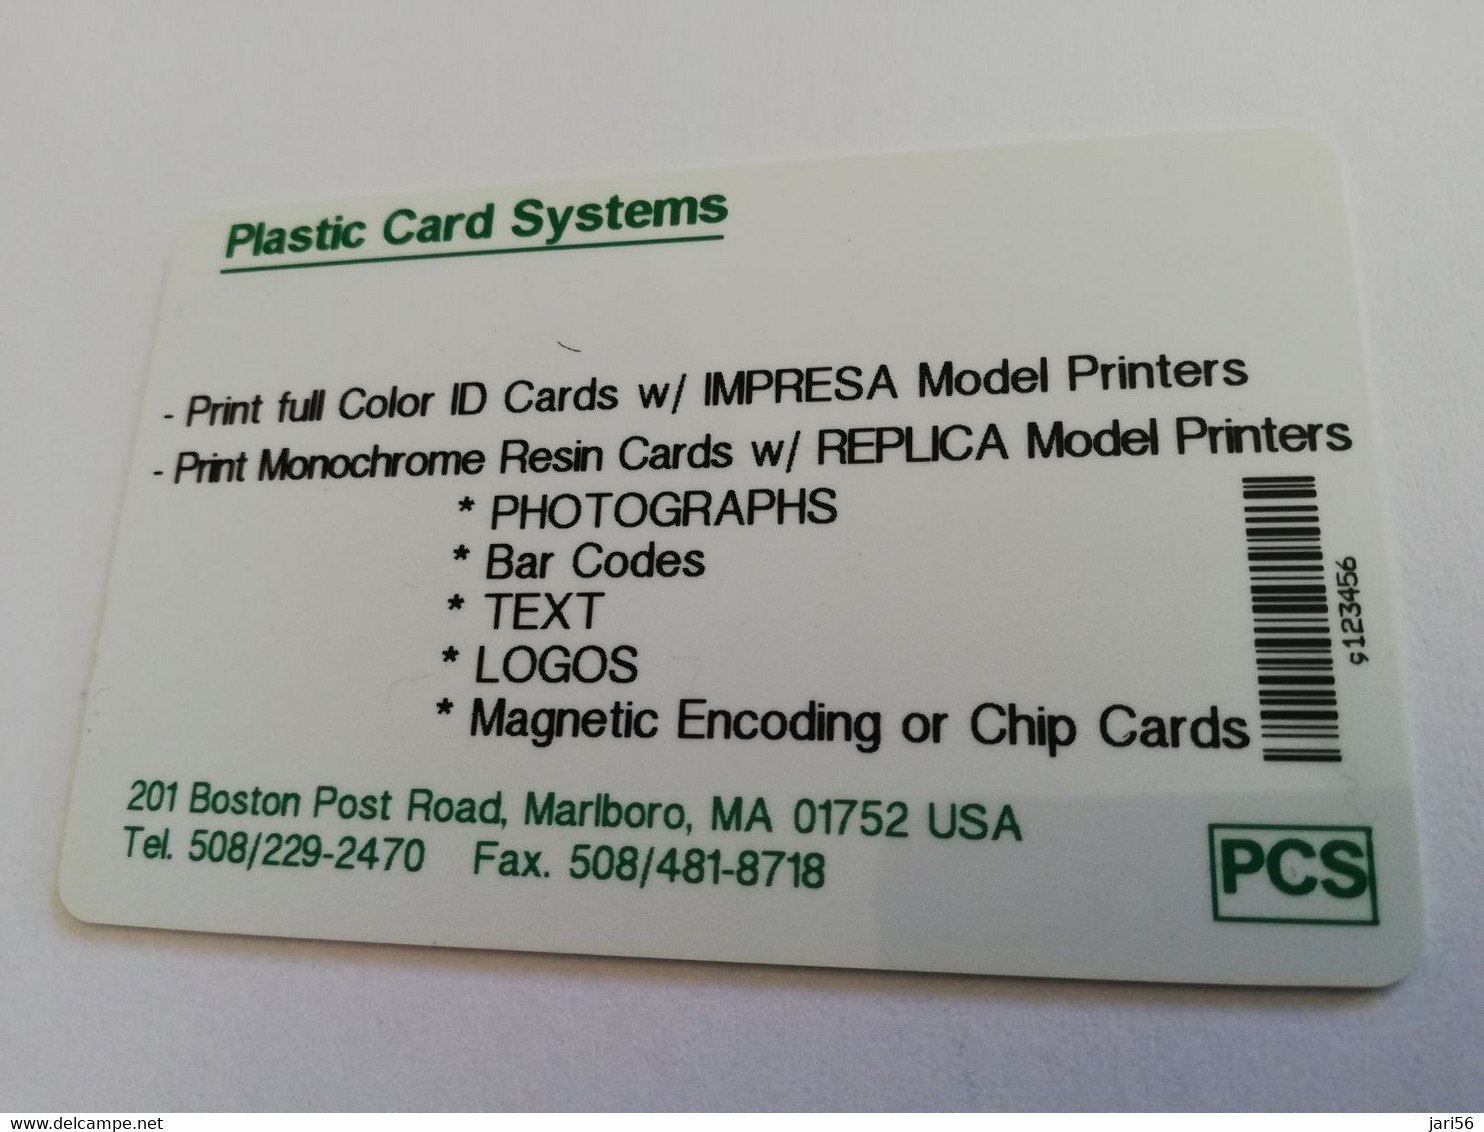 USA  $25,- SAMPLE CARD PCS PHONECARD   PLASTIC CARD SYSTEMS  WHITE HOUSE    **4325** - Cartes à Puce